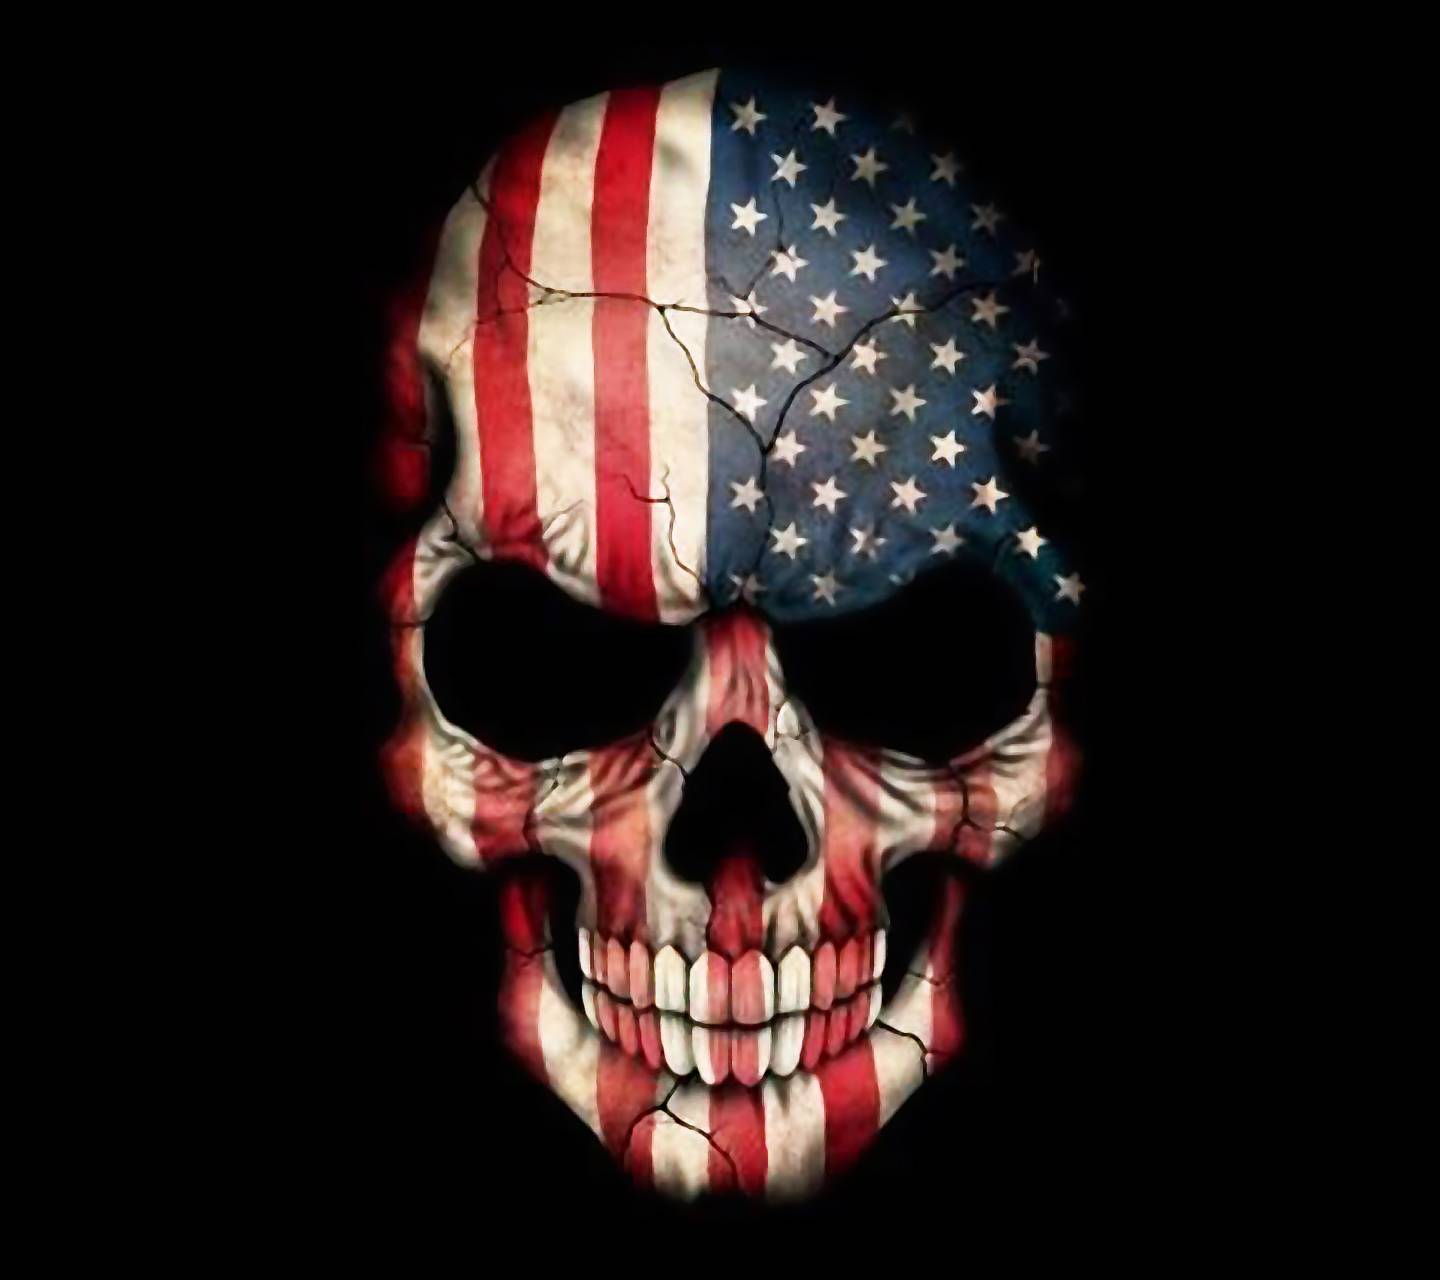 Download American Skull wallpaper by DiablosFate  60  Free on ZEDGE  now Brows  American flag wallpaper iphone American flag wallpaper Dark  phone wallpapers